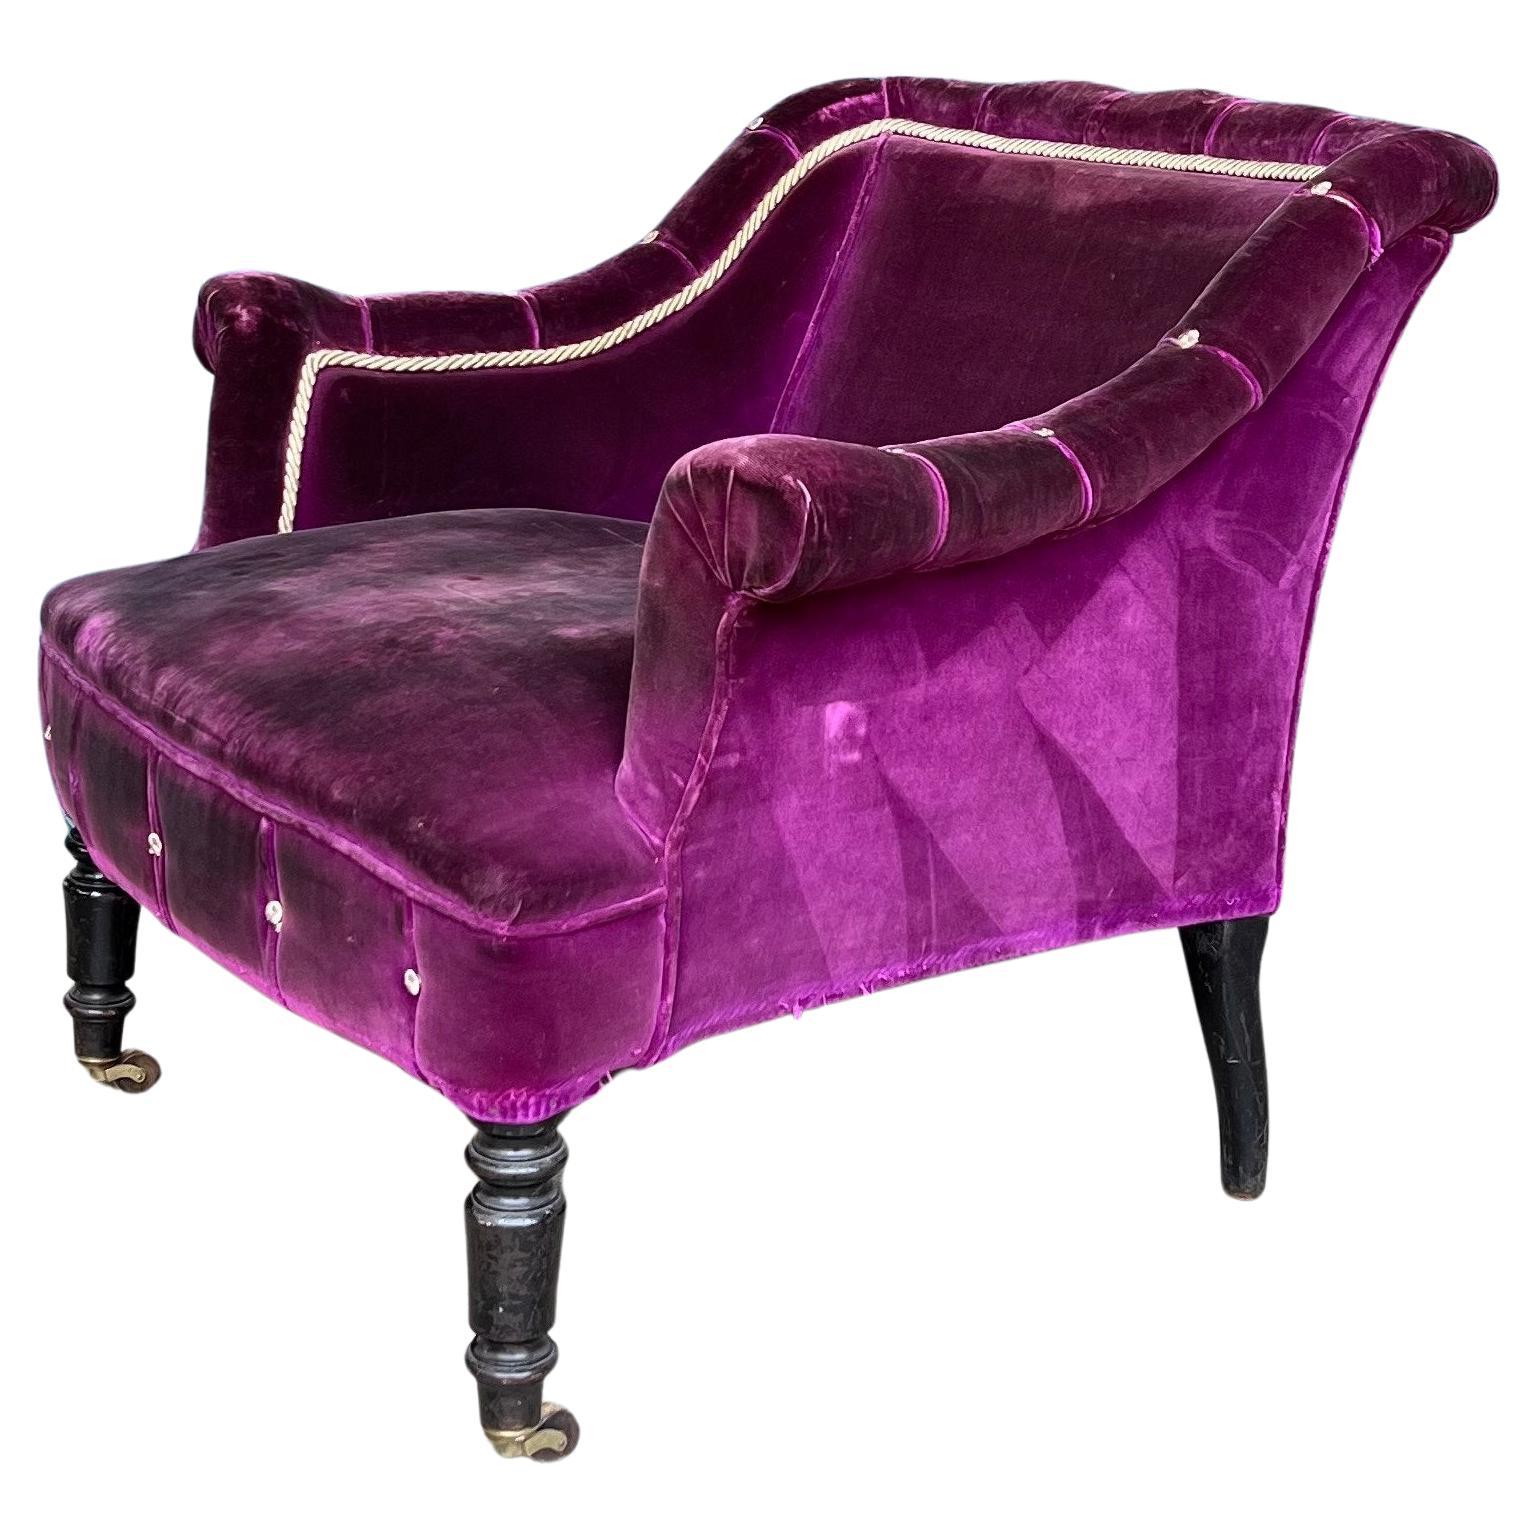 French 19th Century Armchair in Distressed Purple Velvet with White Braided Trim